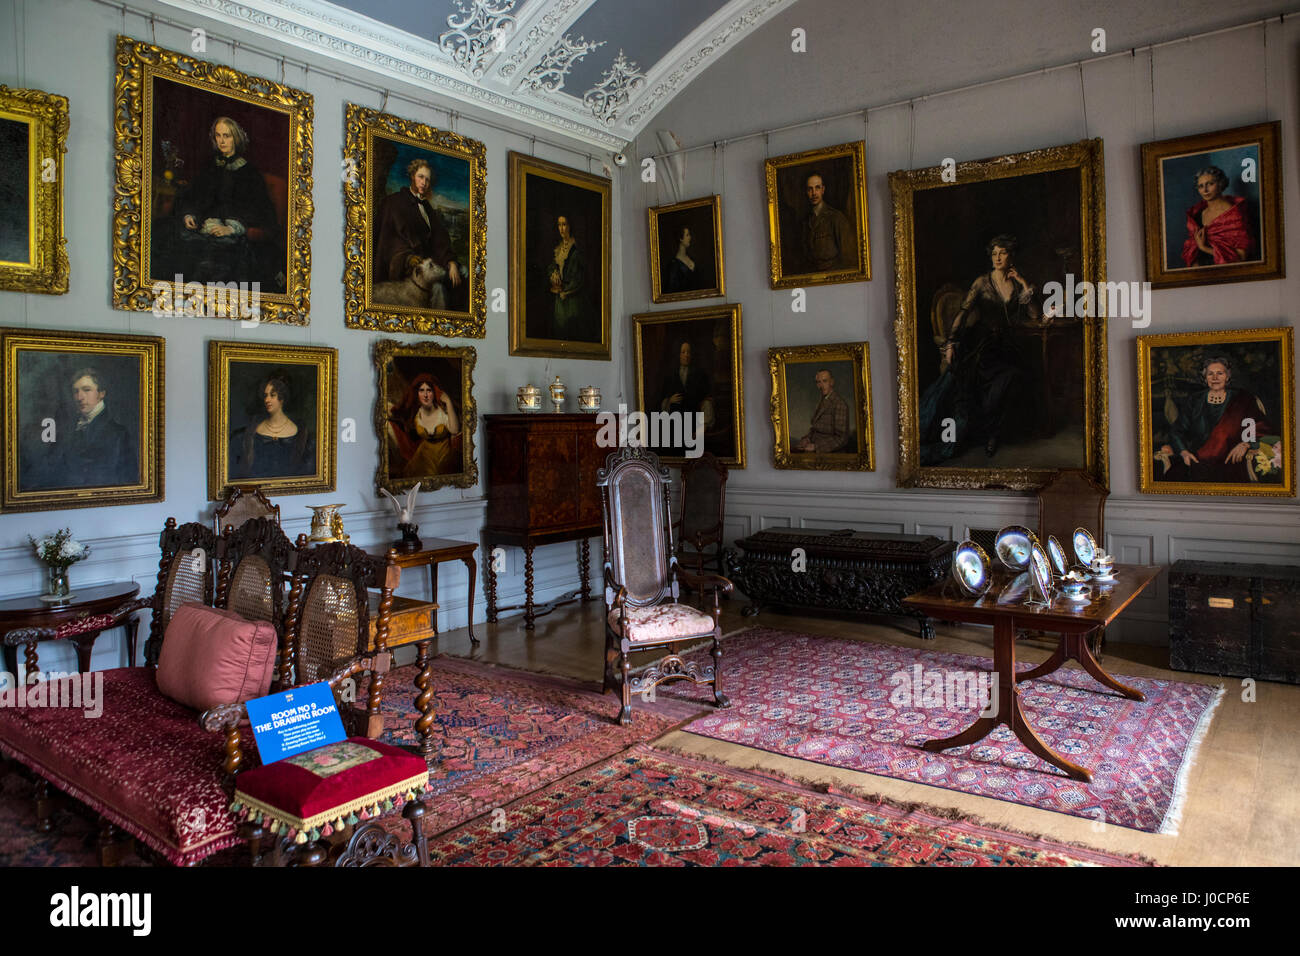 CUMBRIA, UK - APRIL 5TH 2017: A view of the Drawing Room at Muncaster Castle in the Lake District in Cumbria, UK, on 5th April 2017. Stock Photo